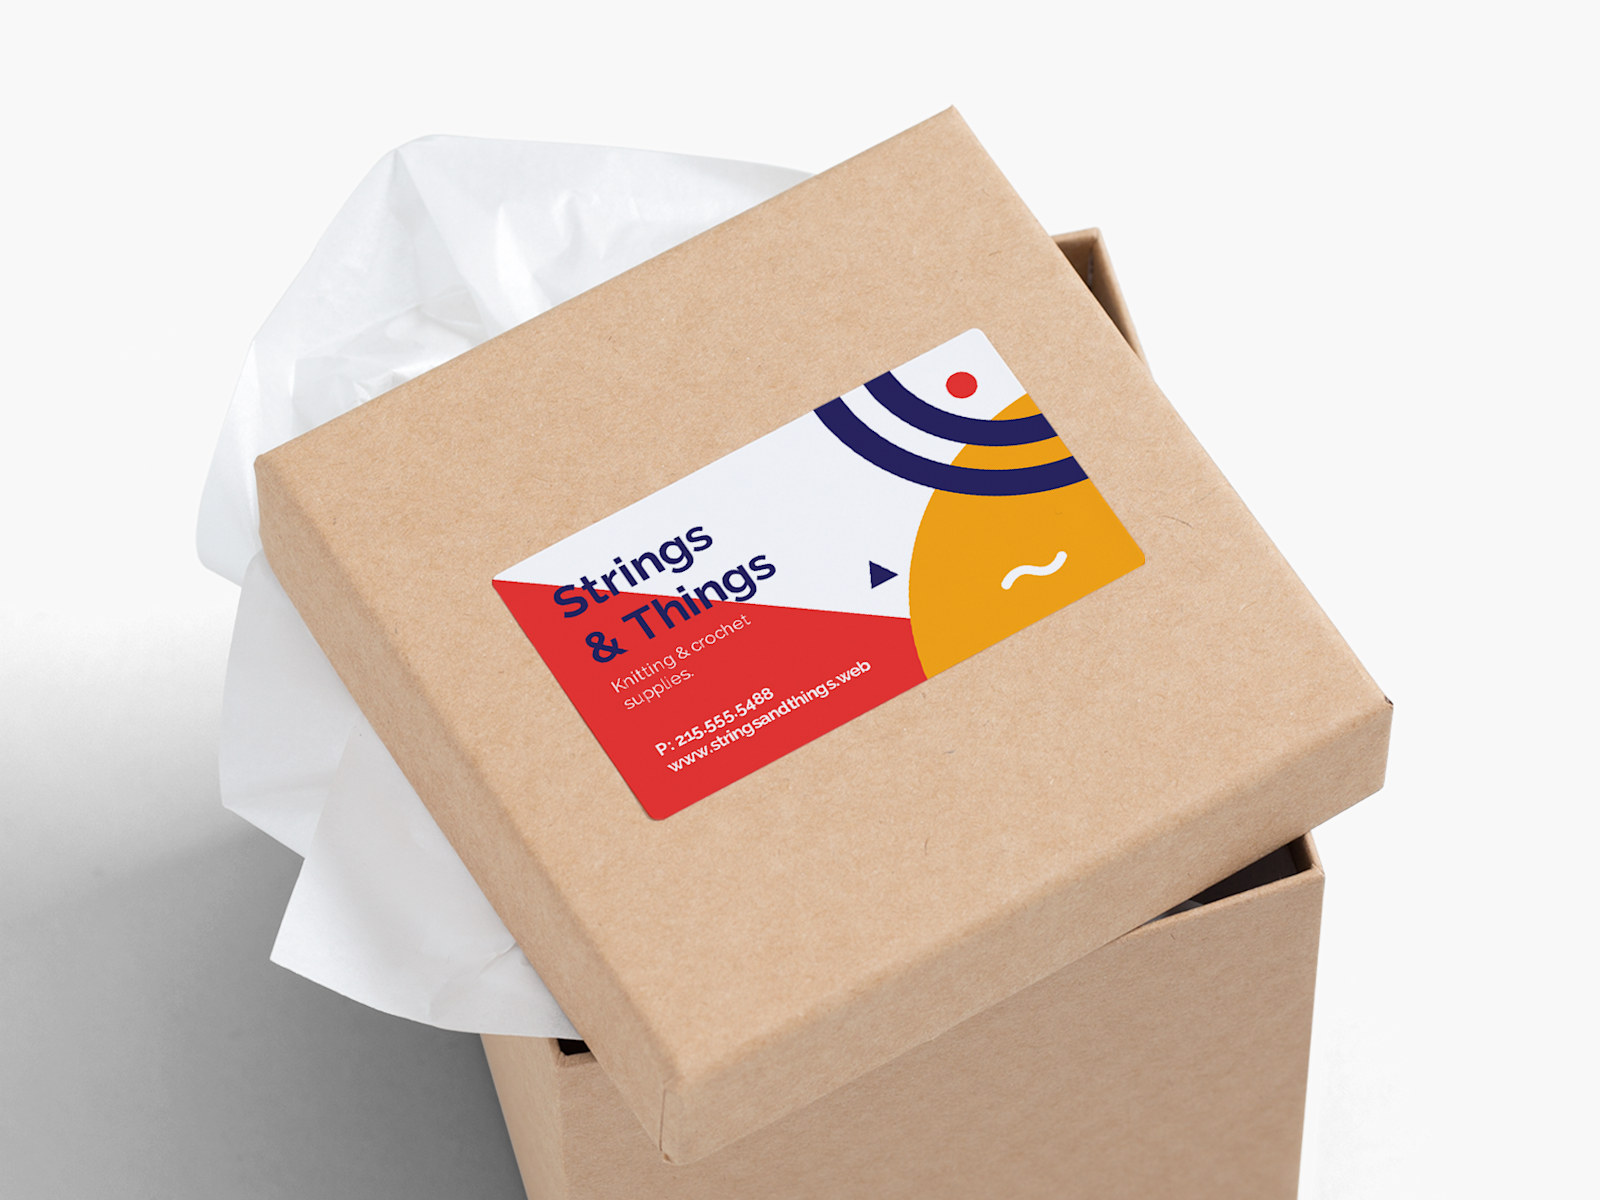 A packaging with a business card sticker on the top promoting a knitting and crochet supplies business.